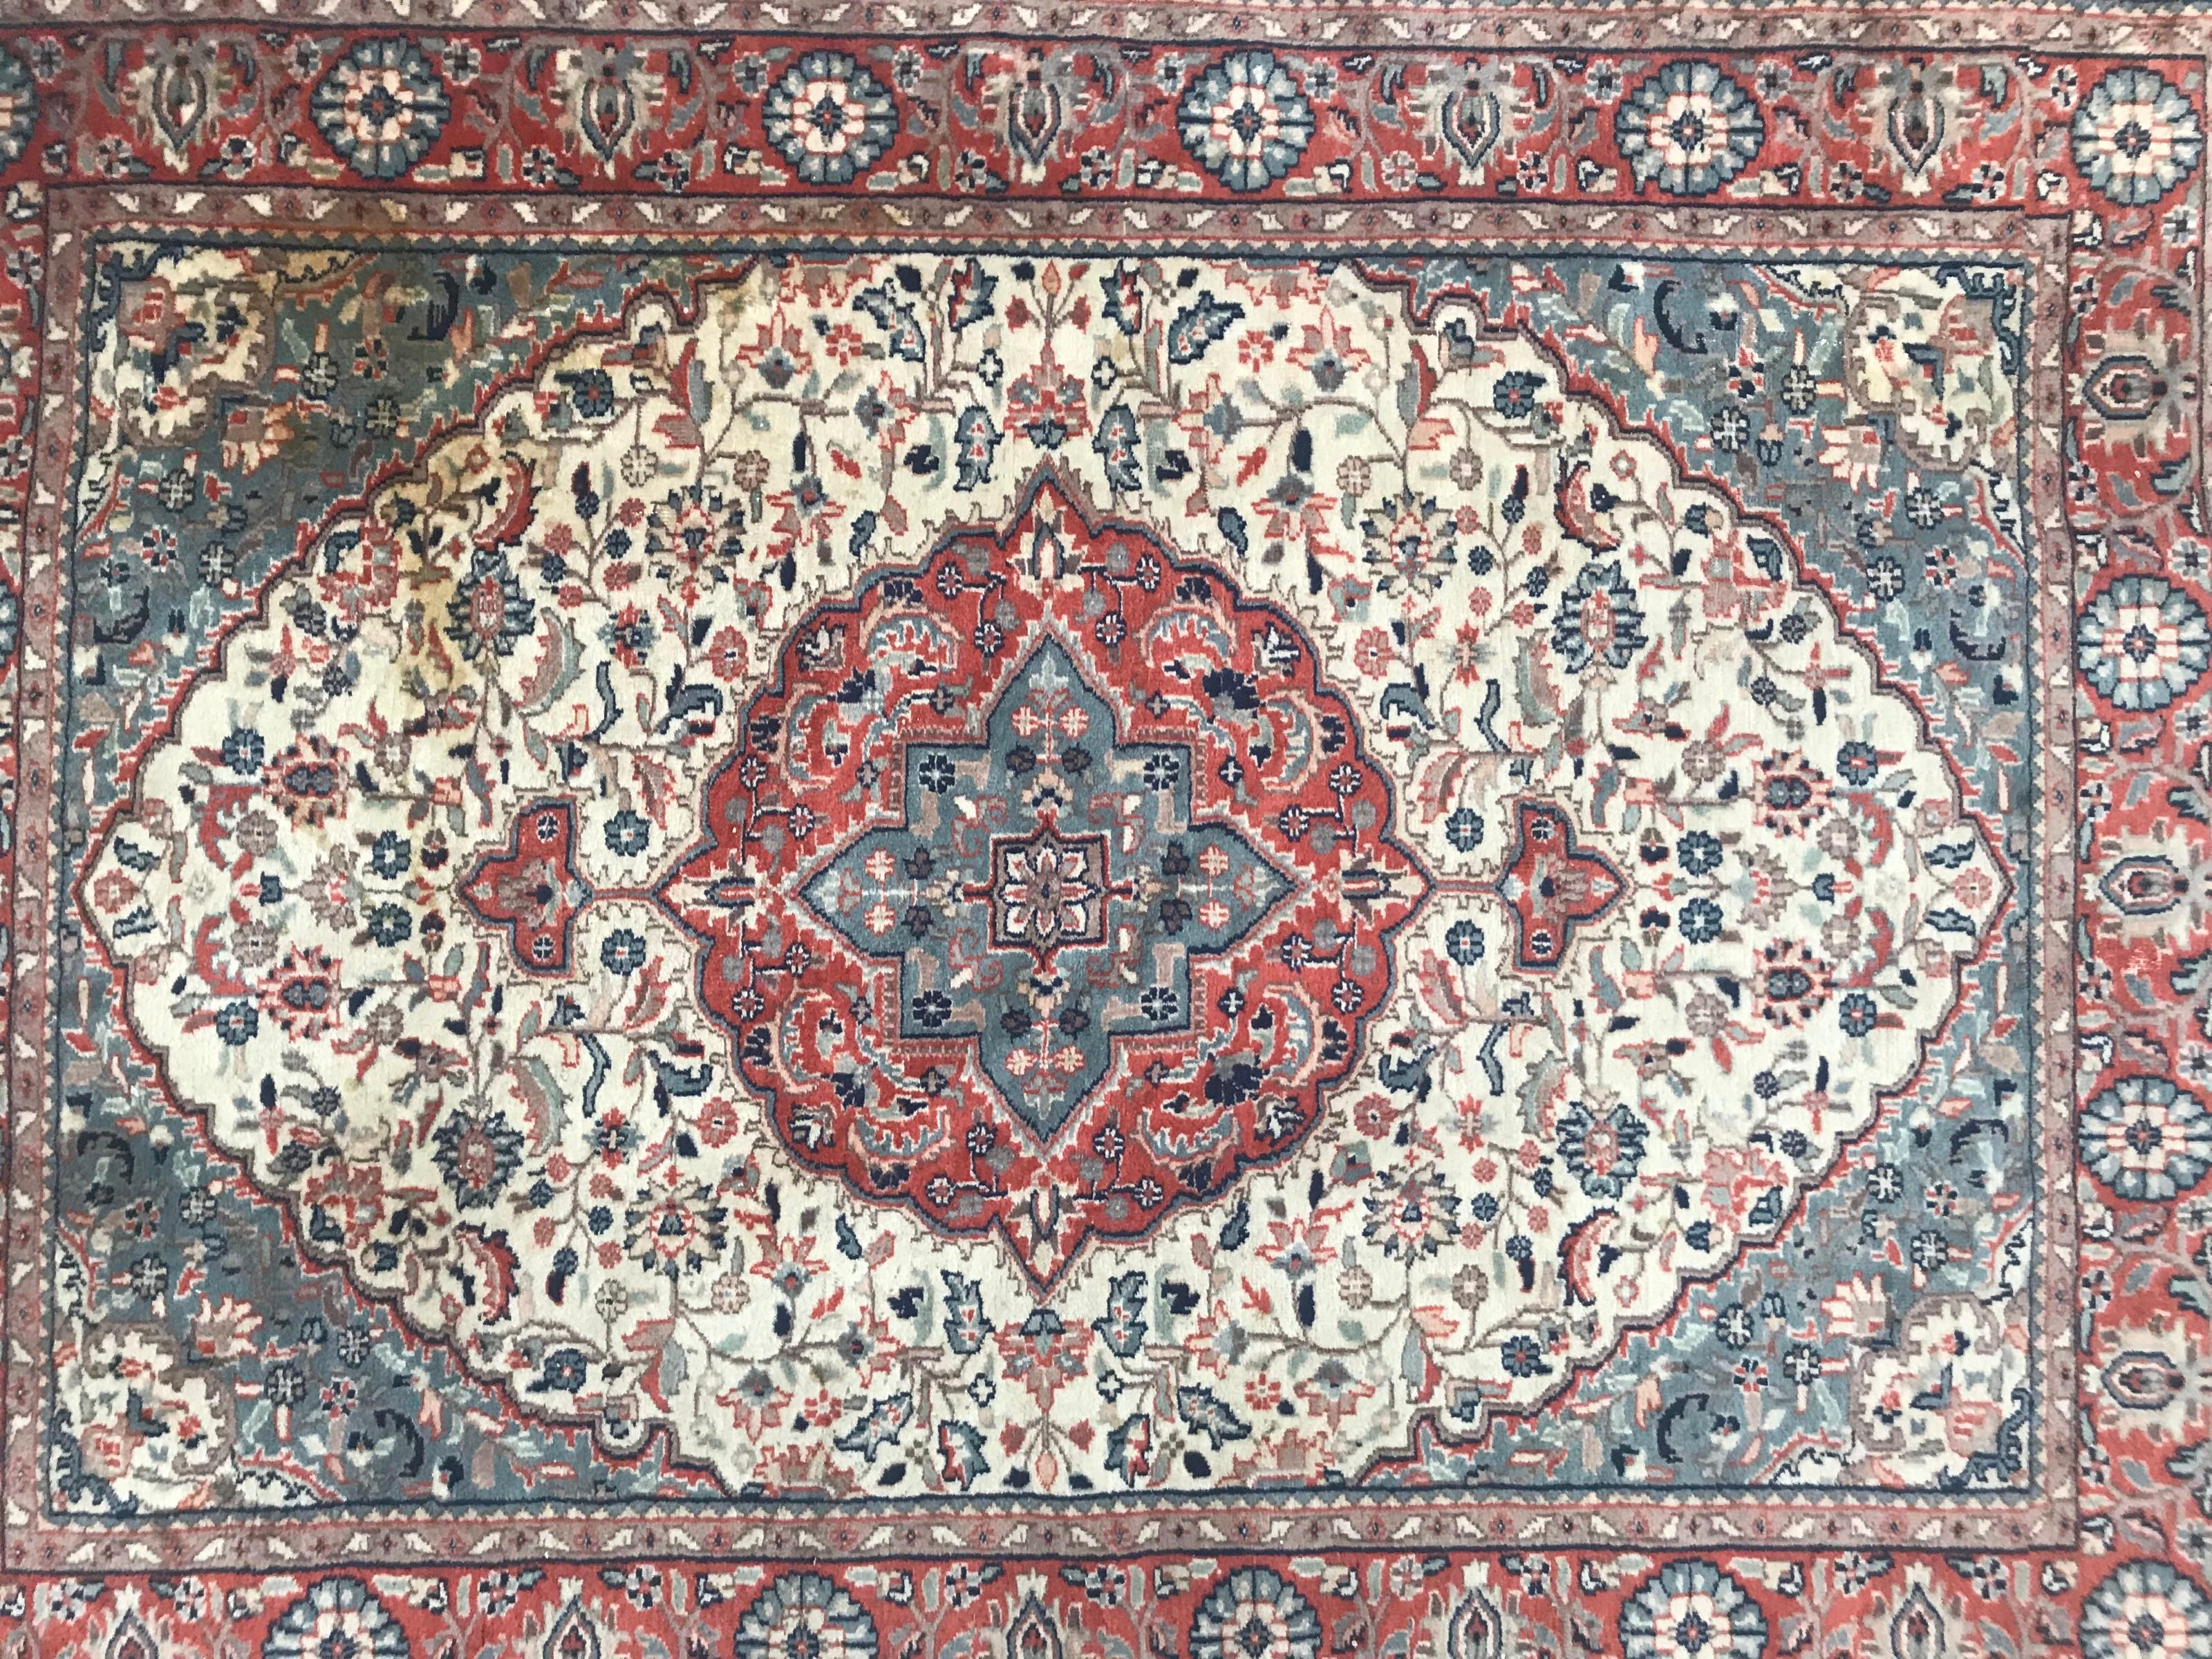 Late 20th century rug with beautiful Persian design and light colors with red and blue, finely hand knotted with wool velvet on cotton foundation. Size: 4.06 x 5.67 feet.